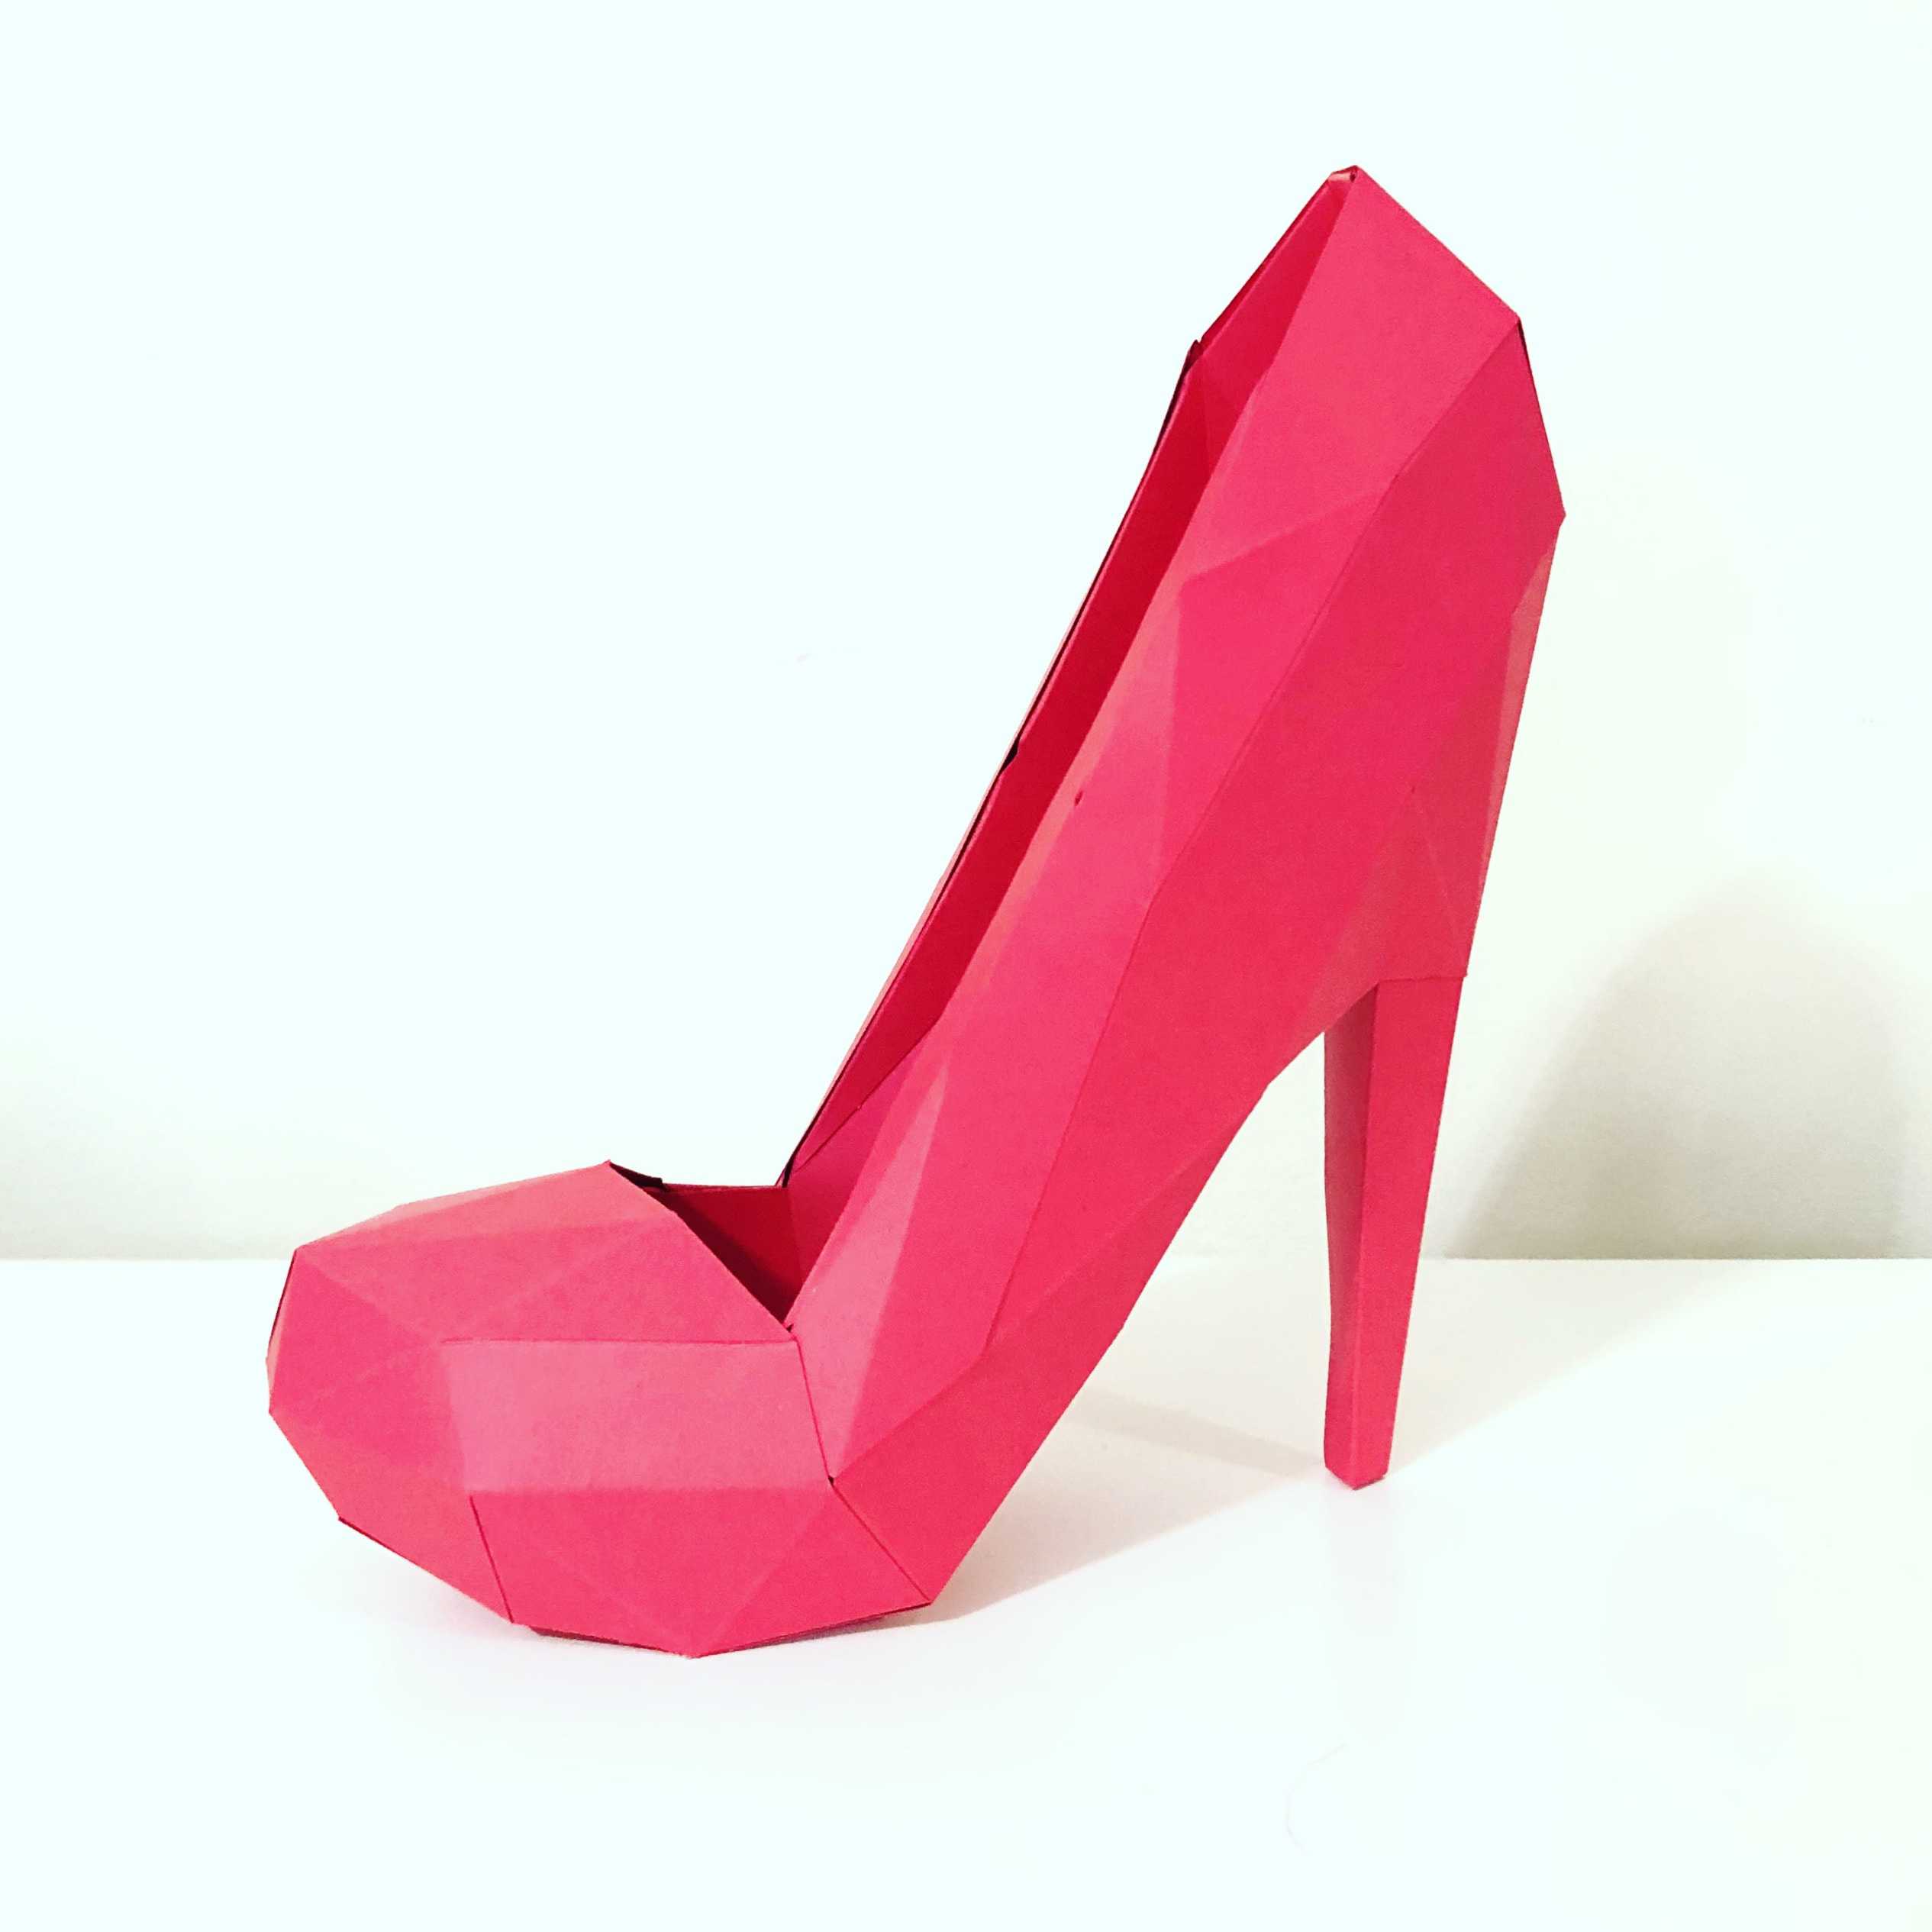 Kit Printed On Cardstock  3D High Heel Shoe Intended For High Heel Shoe Template For Card